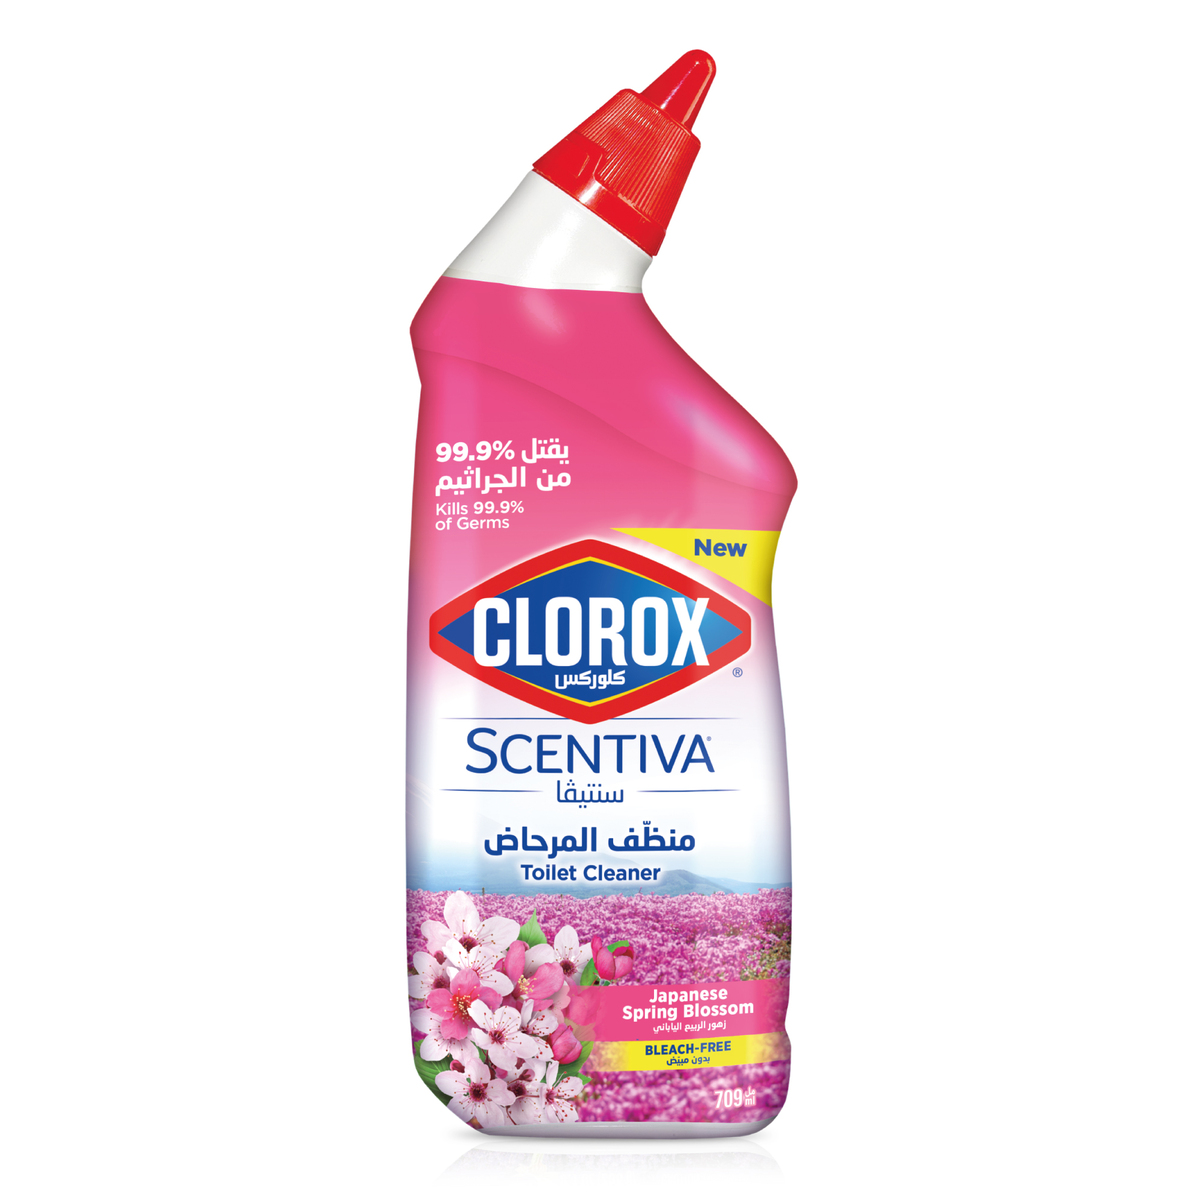 Clorox Scentiva Japanese Spring Blossom Toilet Cleaner 709 ml